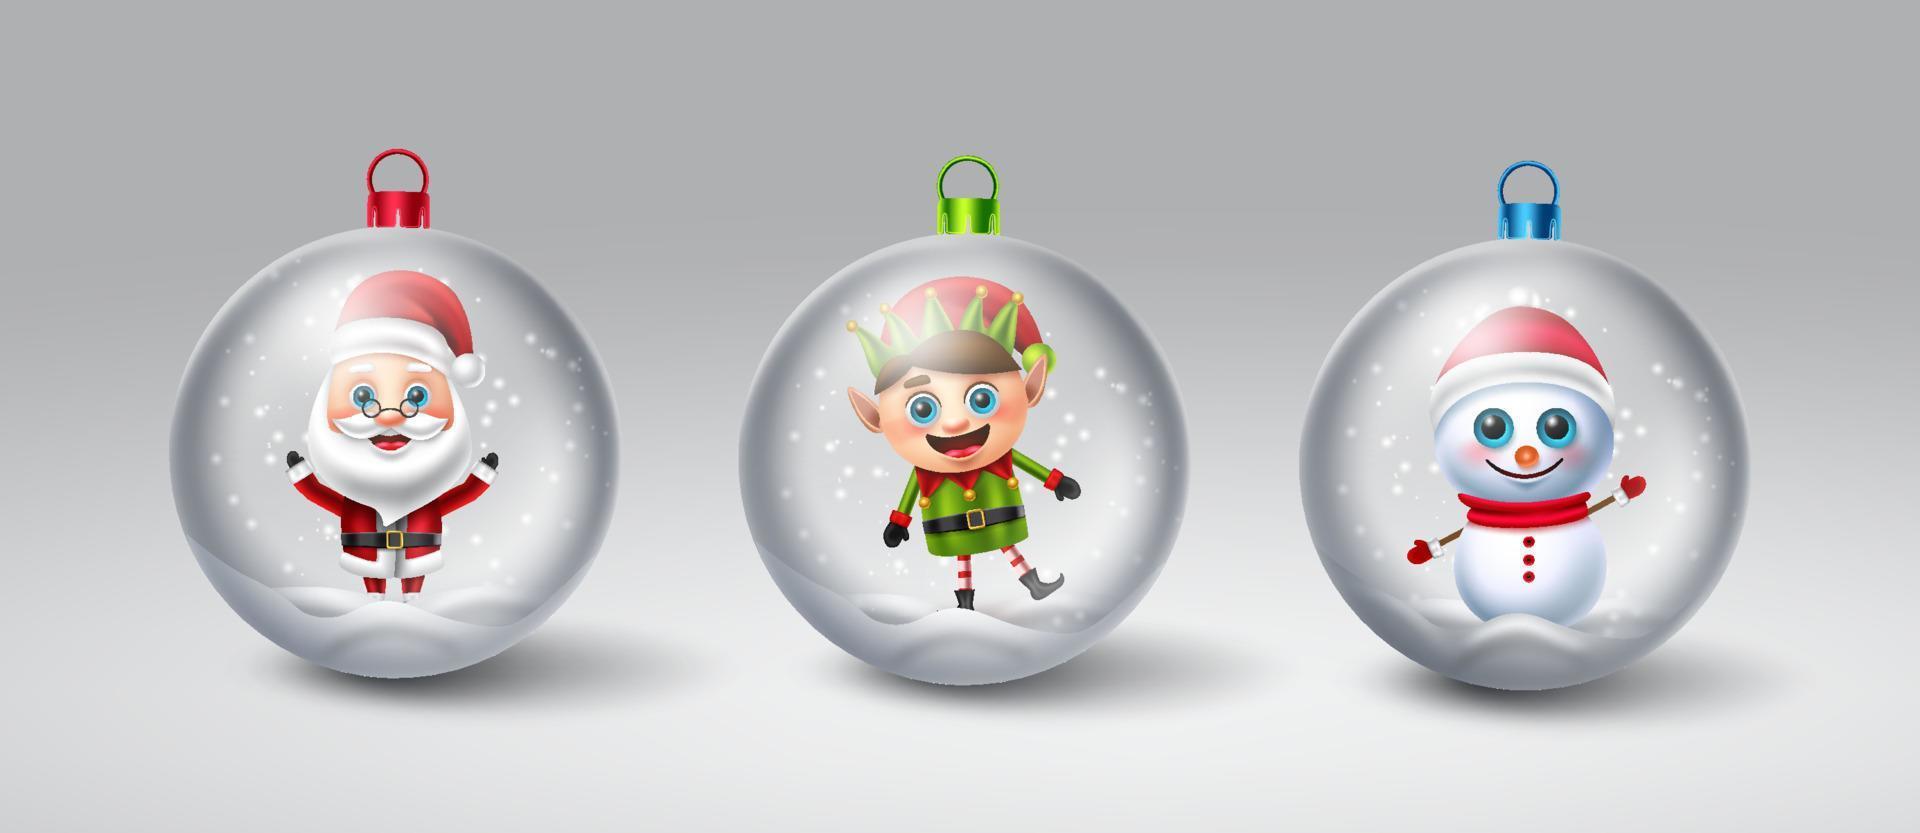 Christmas crystal ball vector set. Christmas characters like santa claus, reindeer, elf and snow man in snow globe element for xmas hanging decoration design. Vector illustration.